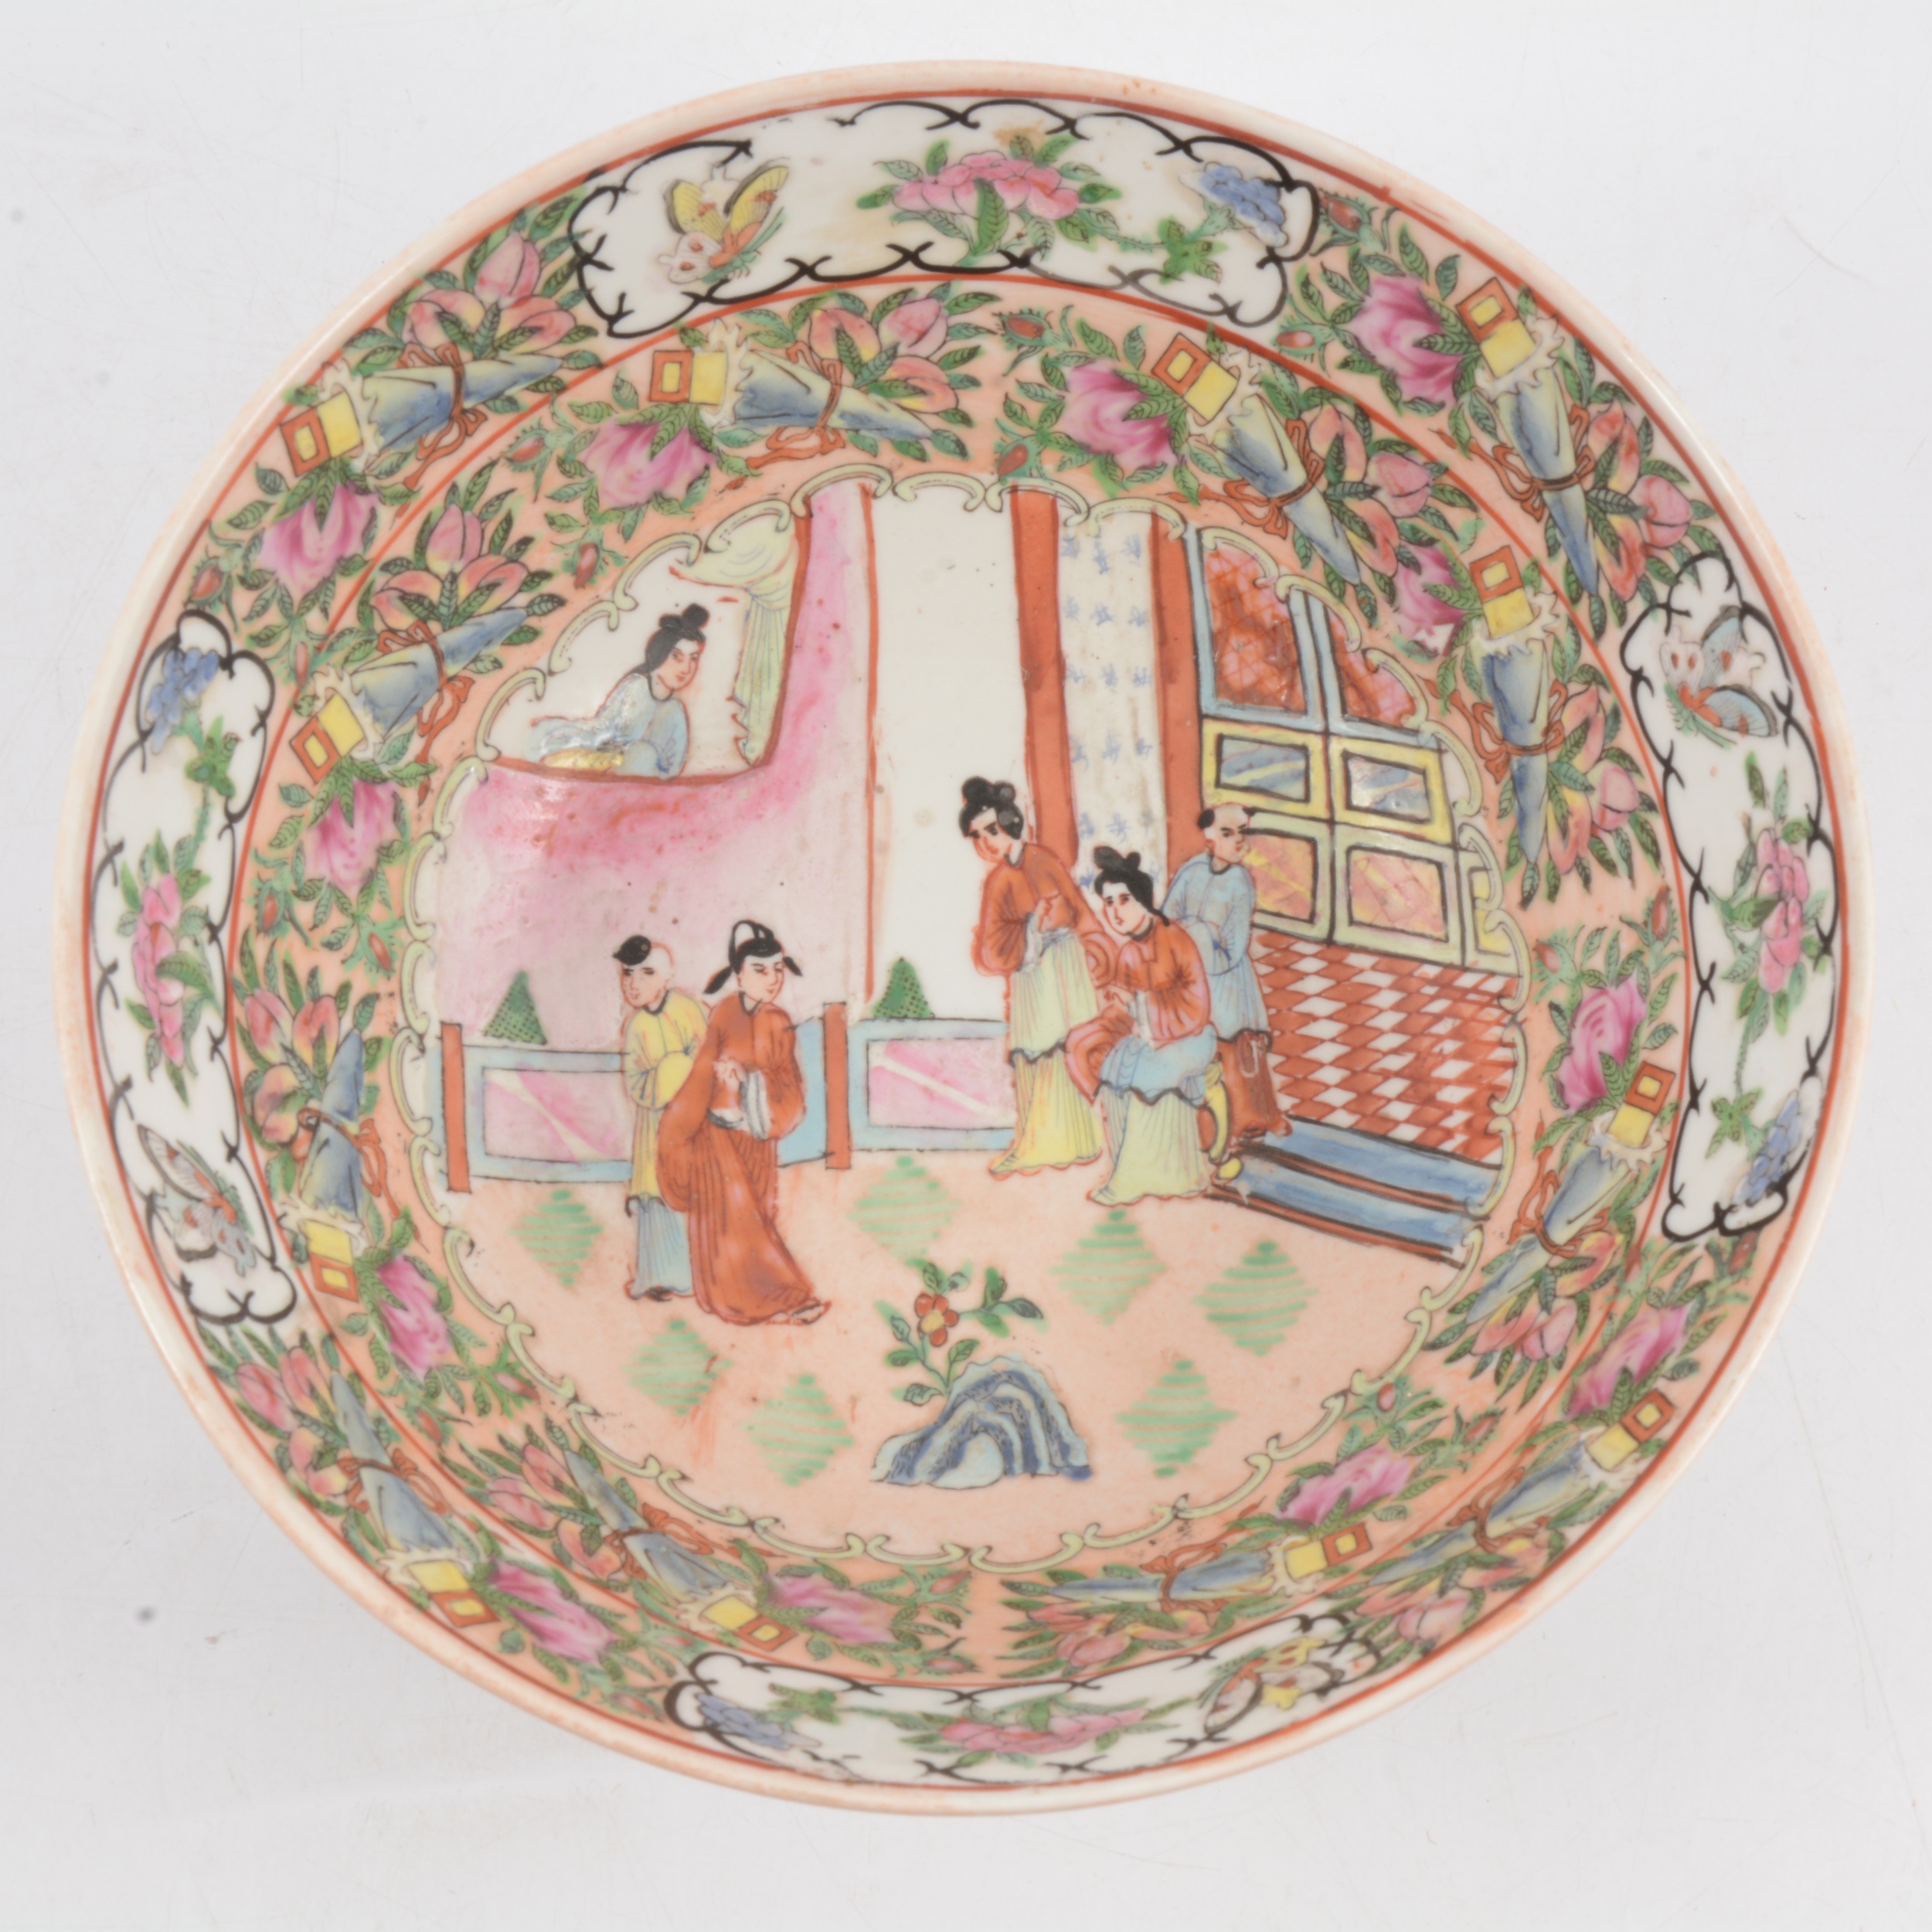 Canton-style polychrome decorated bowl.